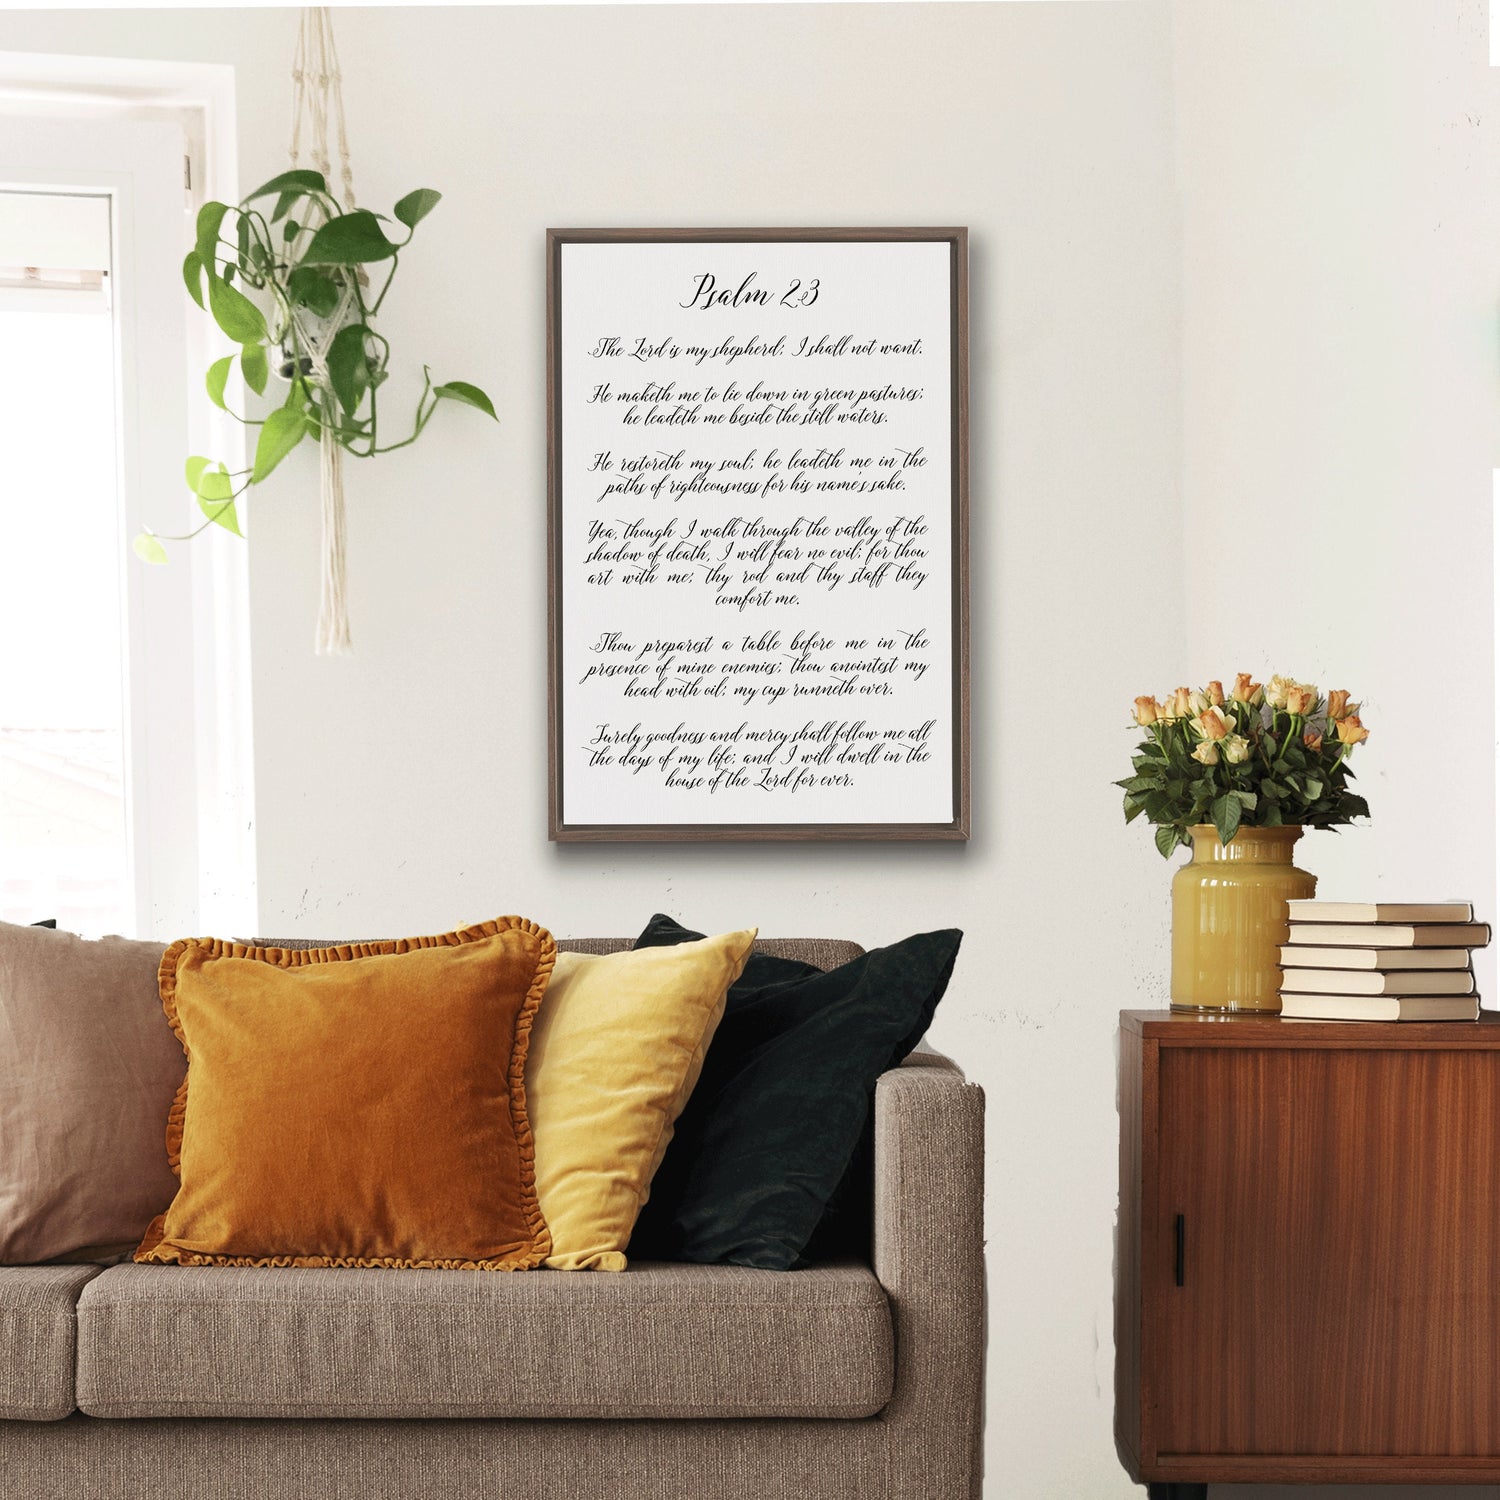 Psalm 23 Scripture Wall Art | Bible Verse Sign | Christian Wall Decor | Bible Verse Wall Art Sign | Psalm 91 Sign With Wood Frame Options